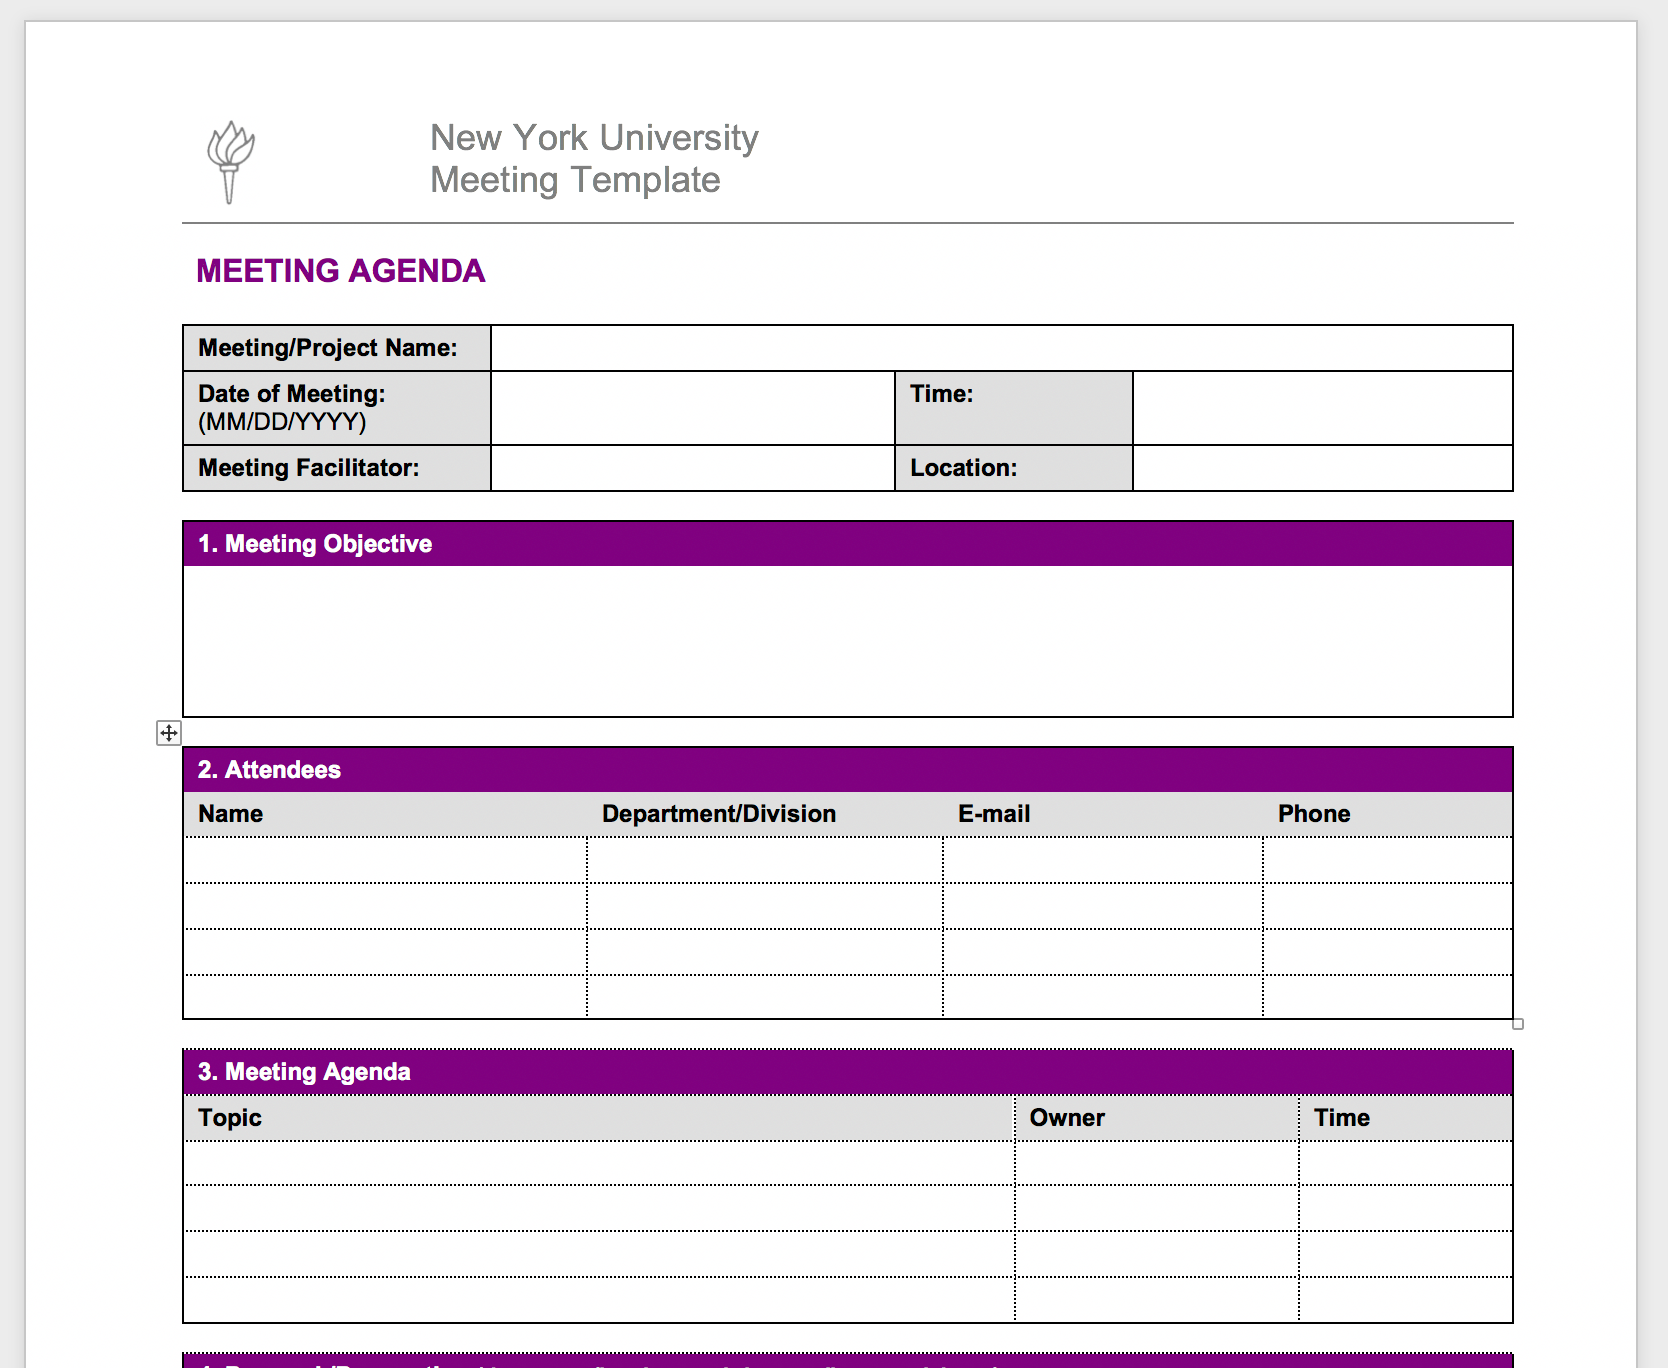 Meeting template from NYU that has meeting details and attendees, and meeting agenda.